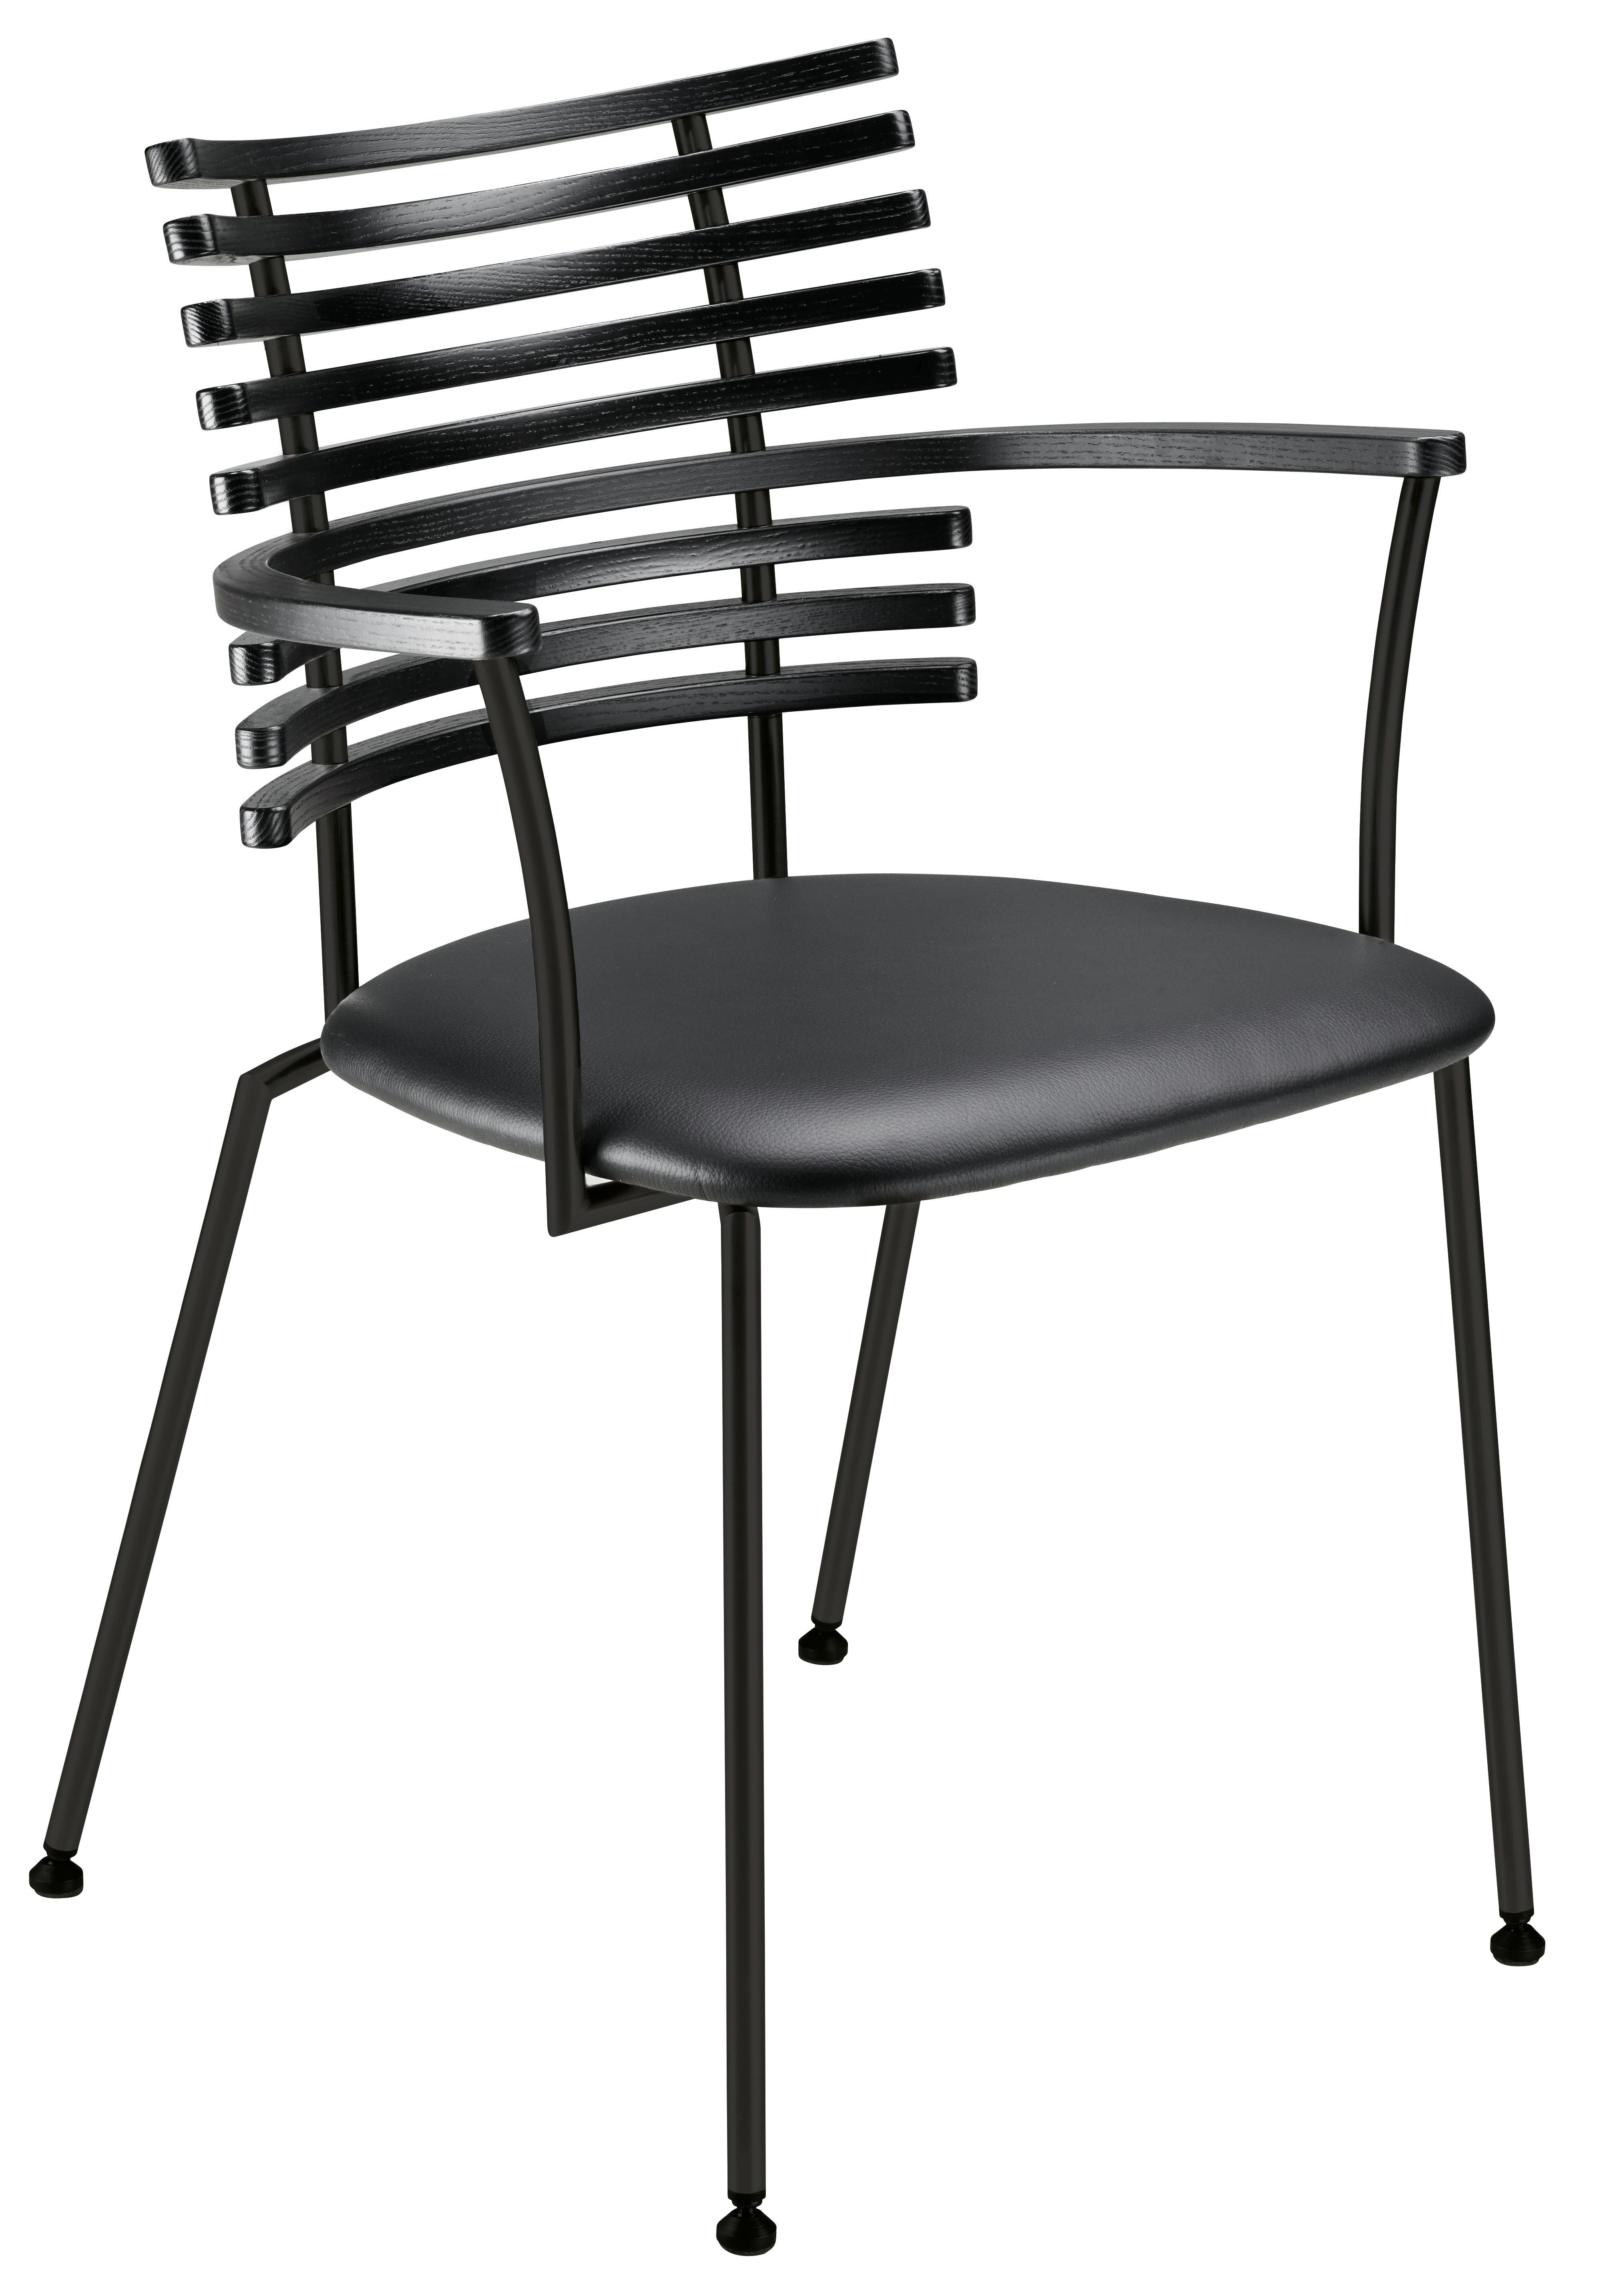 Contemporary SET OF 1 x Table and 6 x chairs - Design by Nissen & Gehl MDD and Henrik Lehm For Sale